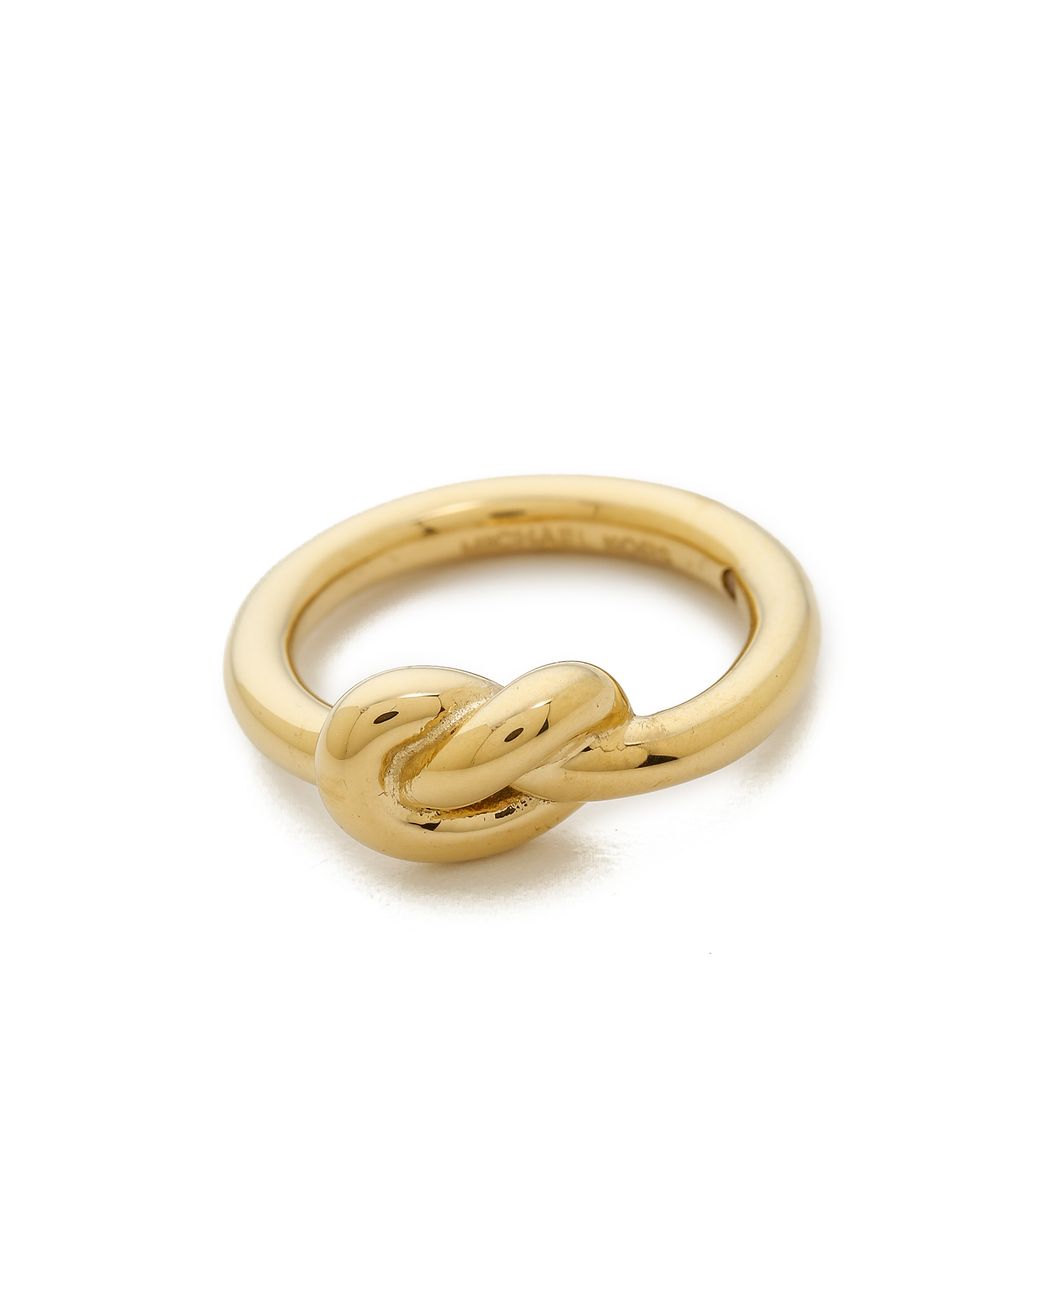 Michael Kors Smooth Metal Knot Ring - Gold in Metallic | Lyst Canada